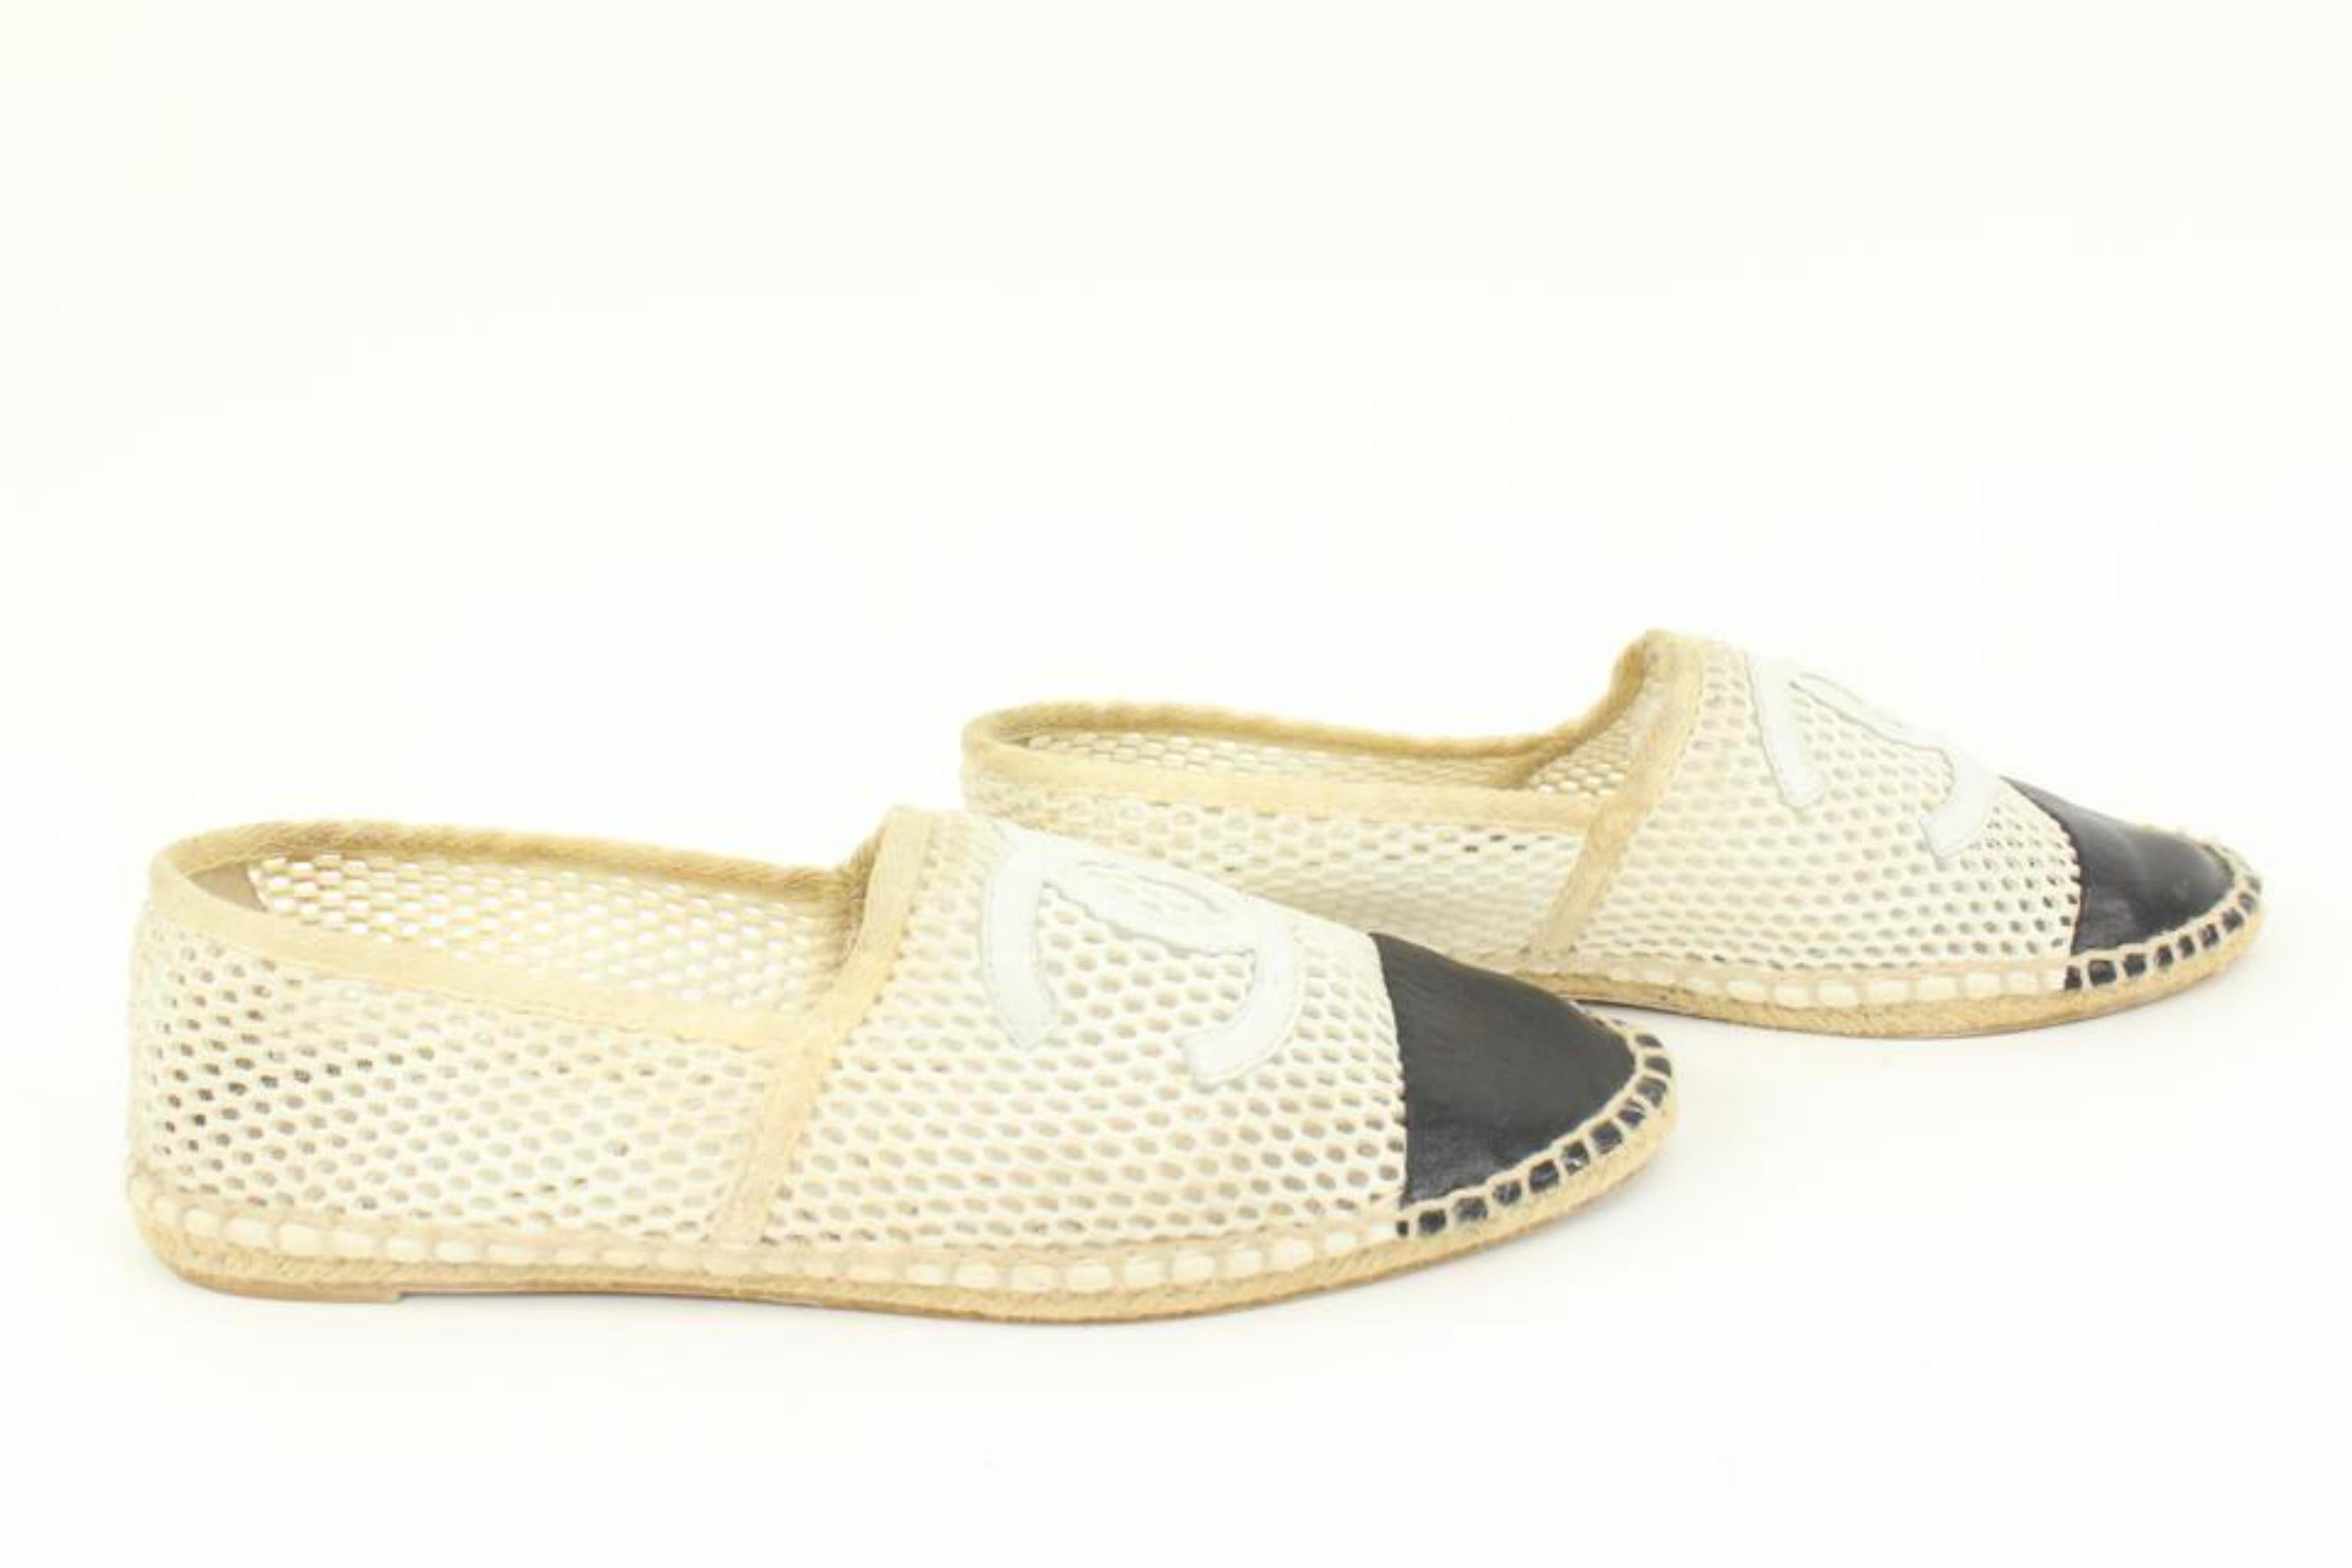 chanel espadrilles made in spain